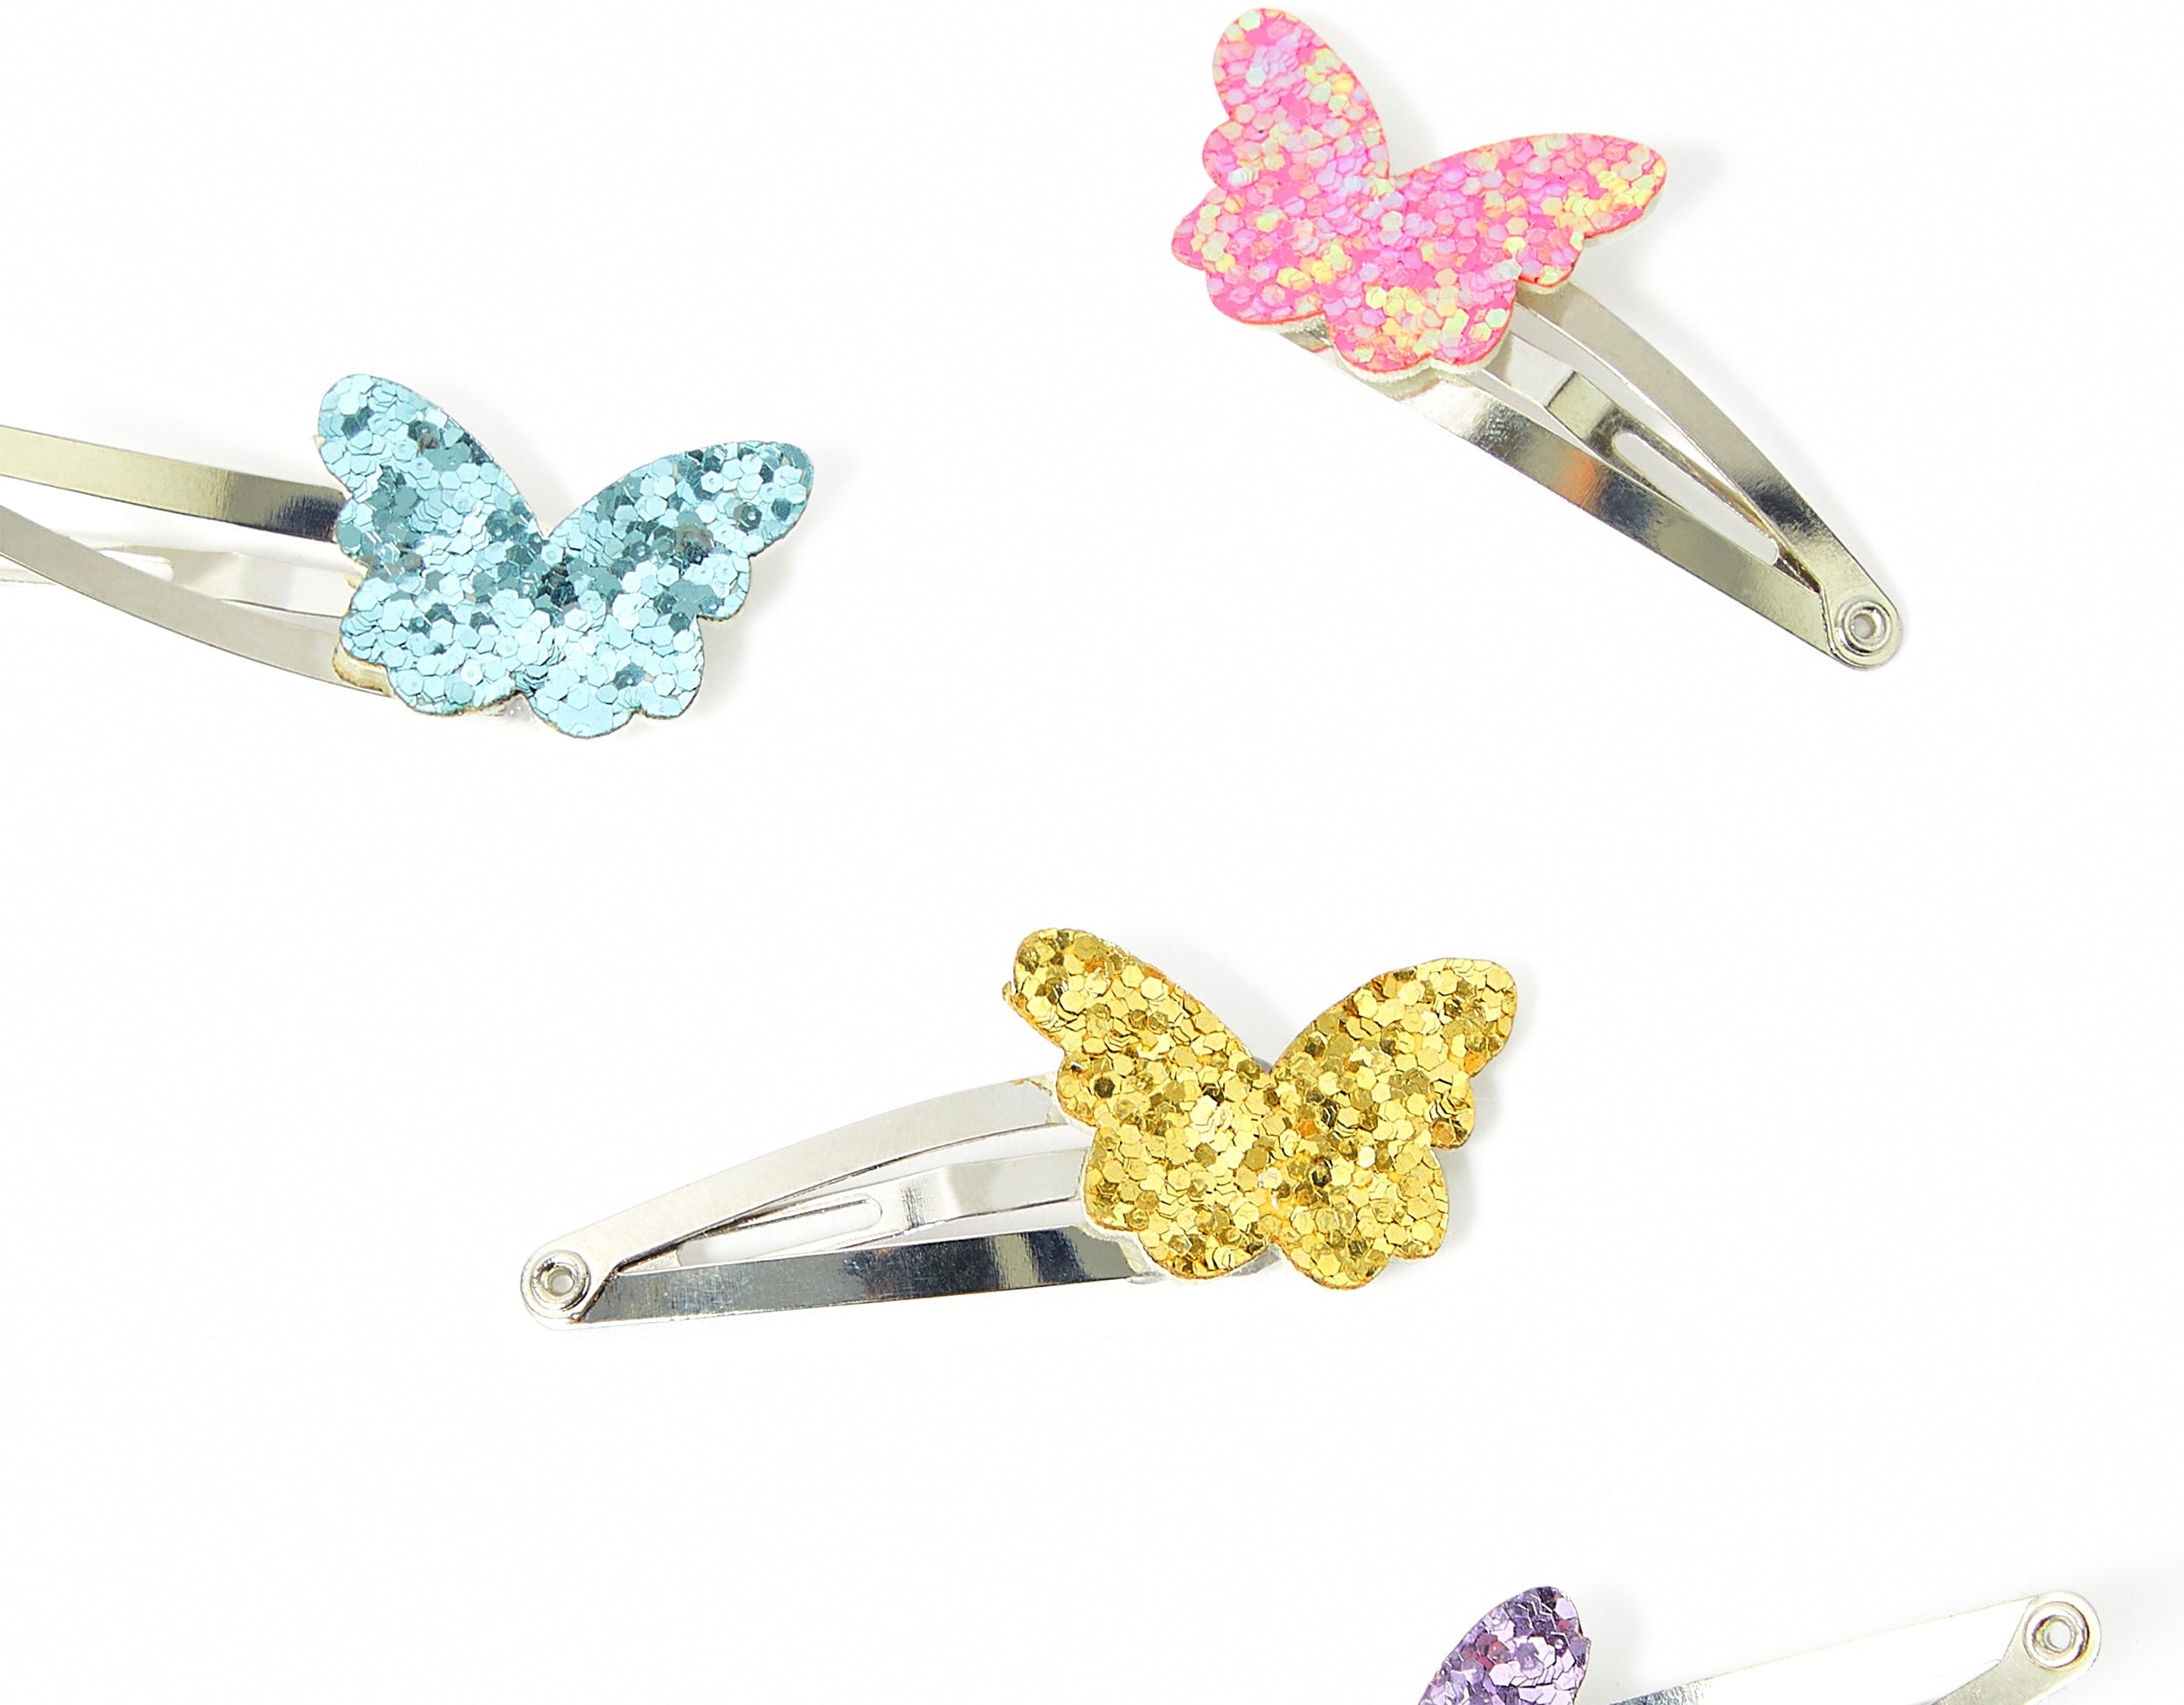 Accessorize Girl set of 4 Butterfly Clic Clacs Hair Clips